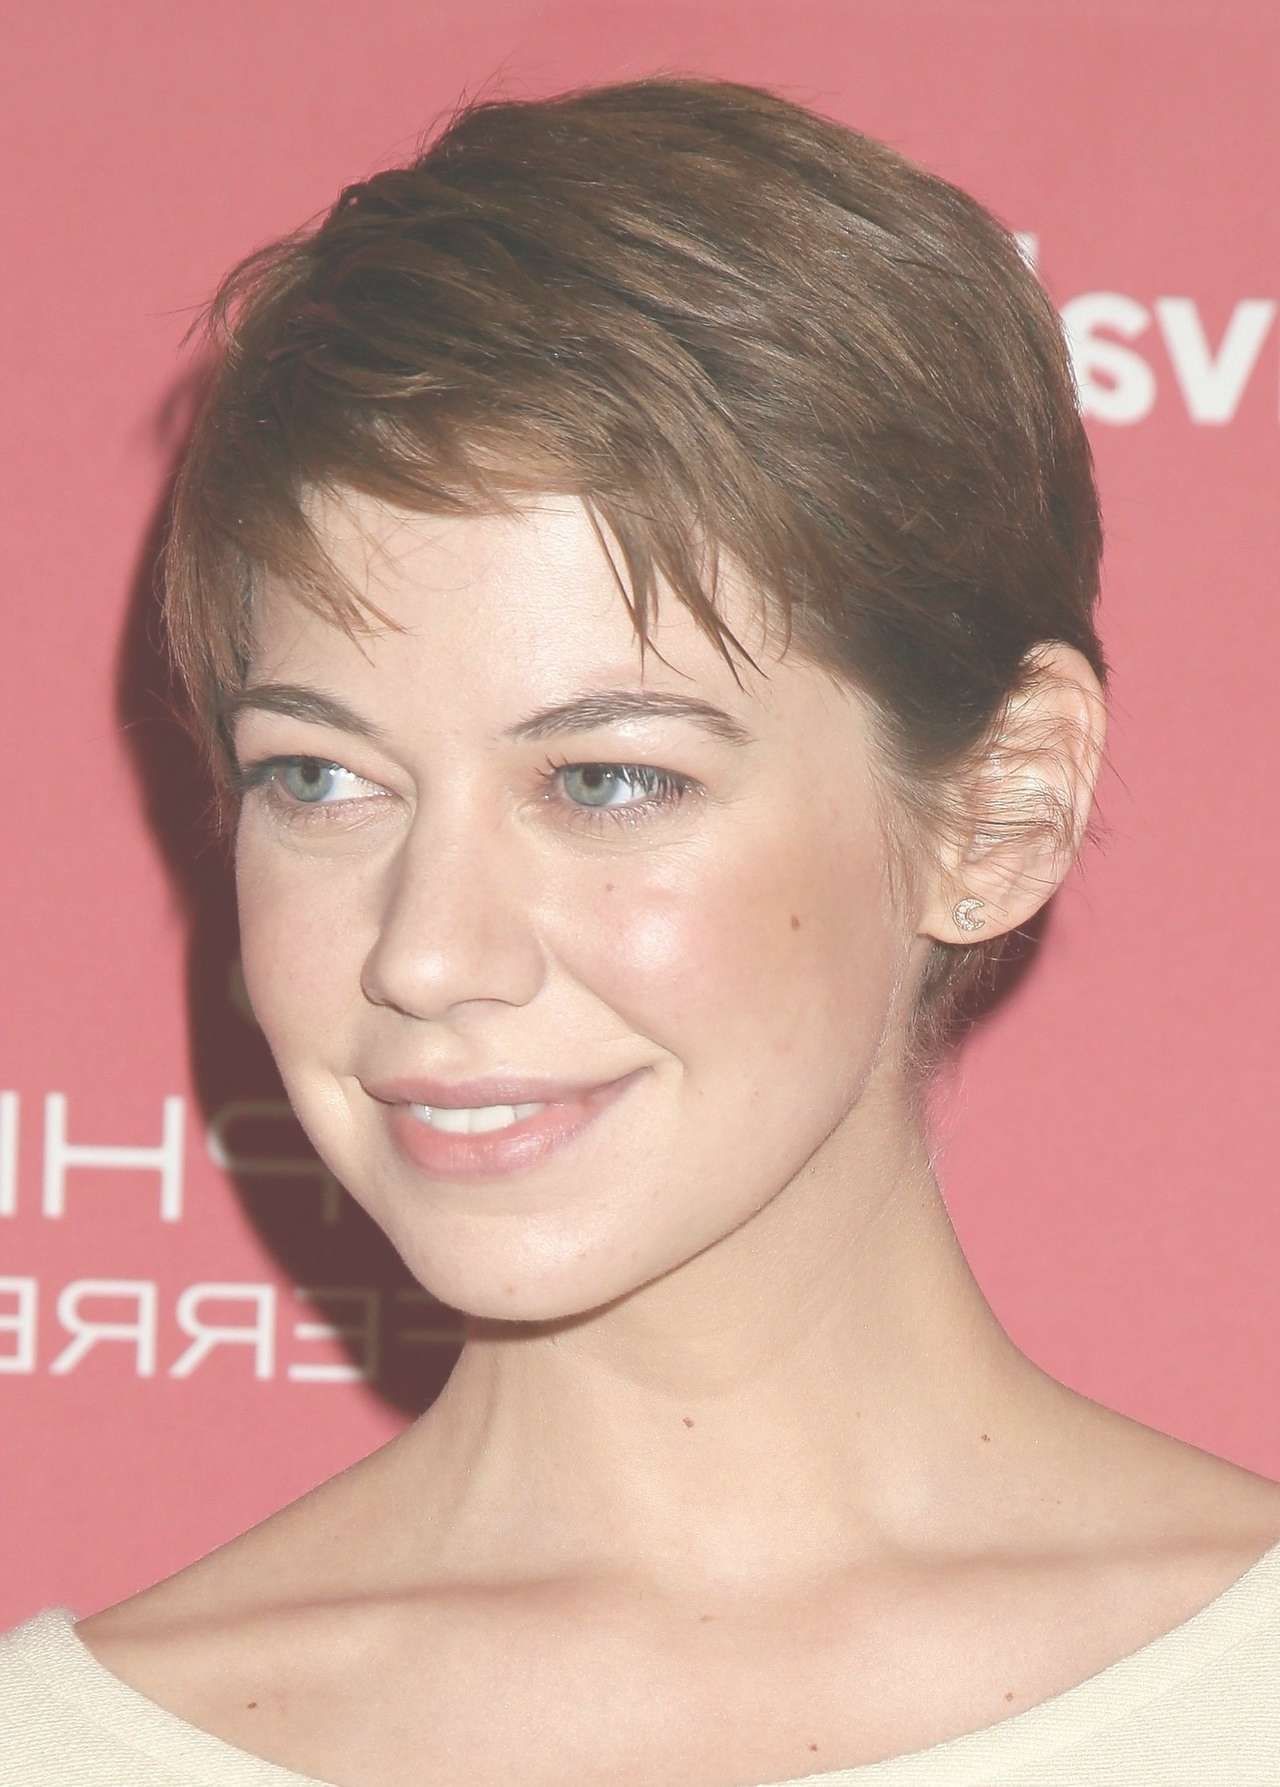 Analeigh Tipton's Drunk Pixie Cut: Celebrity Beauty News | Glamour Inside Latest Actresses With Pixie Hairstyles (View 14 of 15)